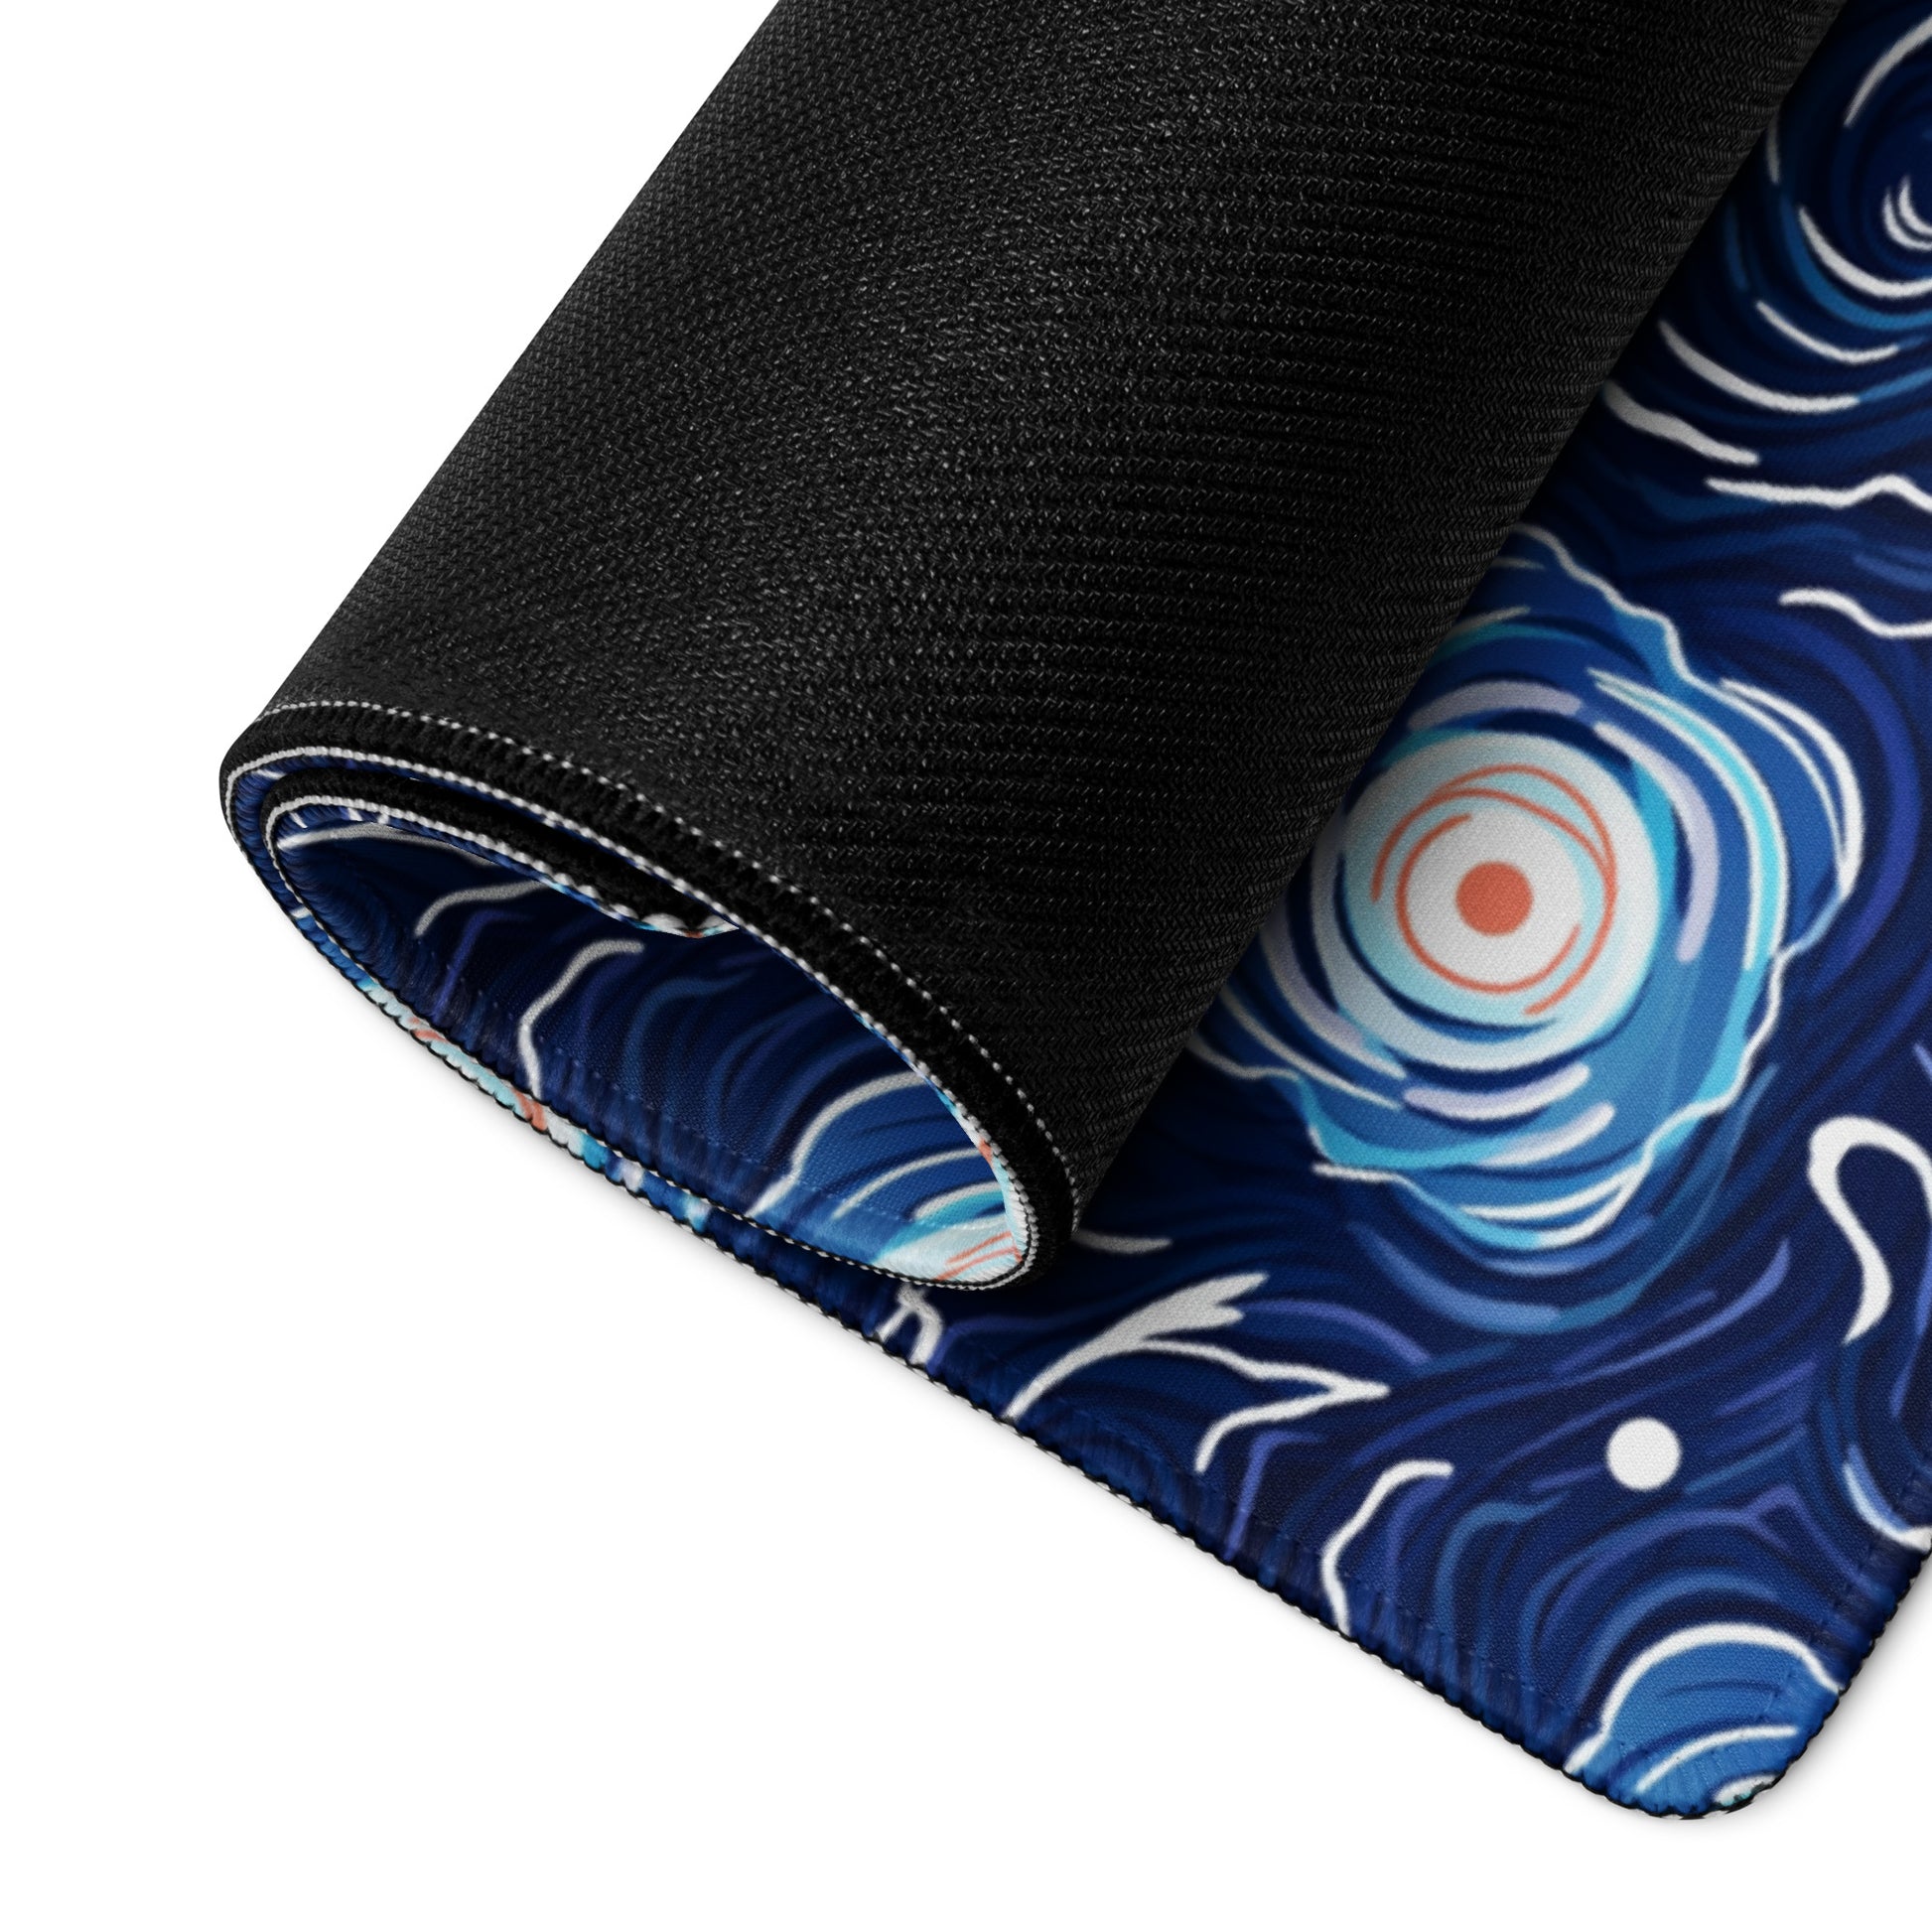 A 36" x 18" desk pad with a blue and white floral pattern rolled up.